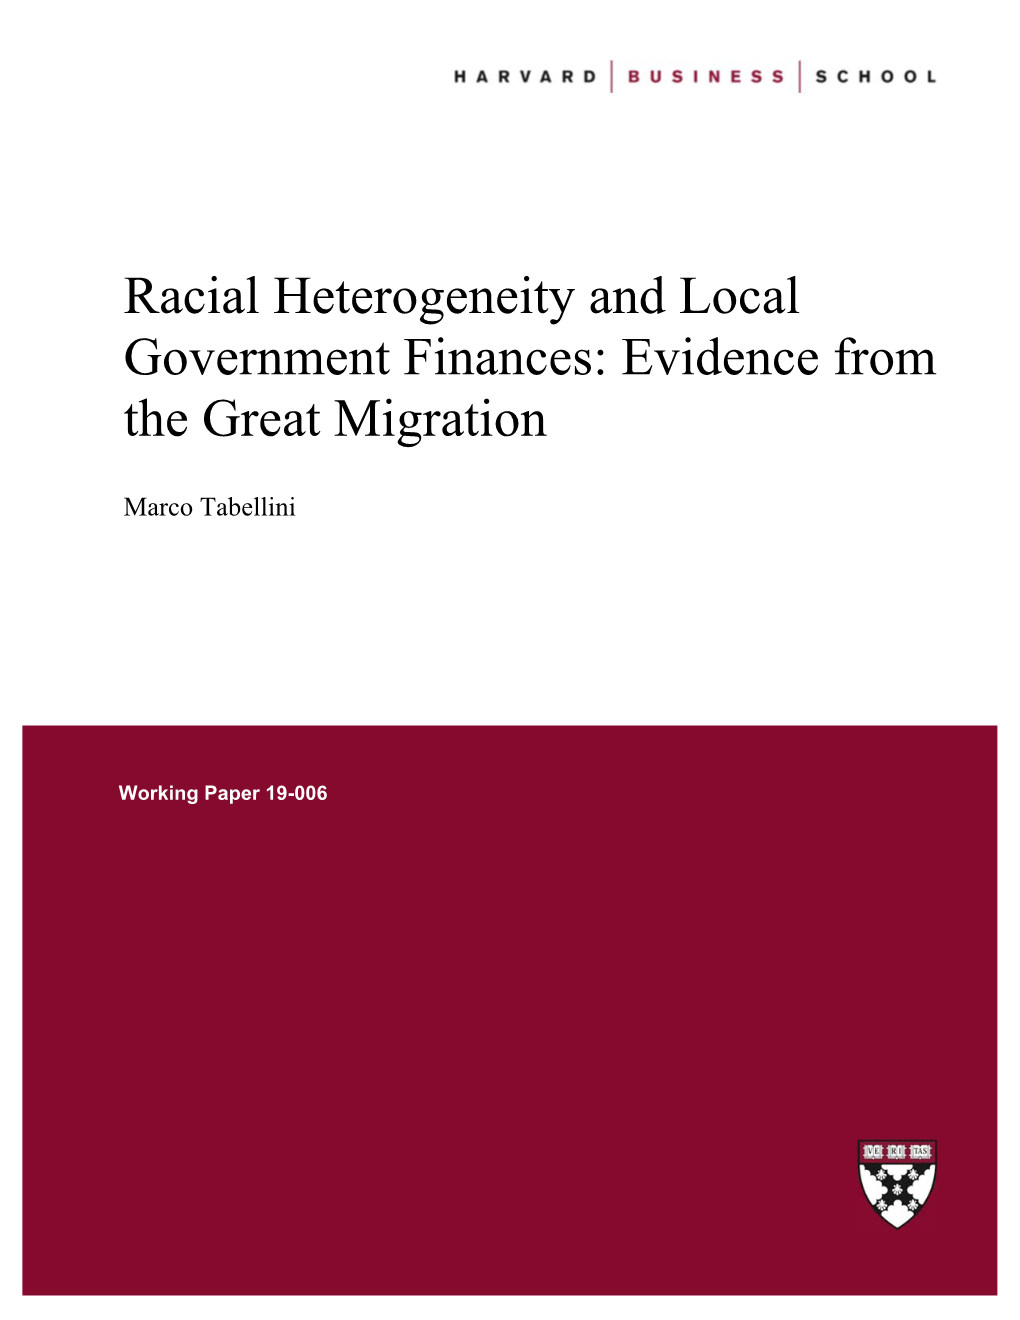 Racial Heterogeneity and Local Government Finances: Evidence from the Great Migration